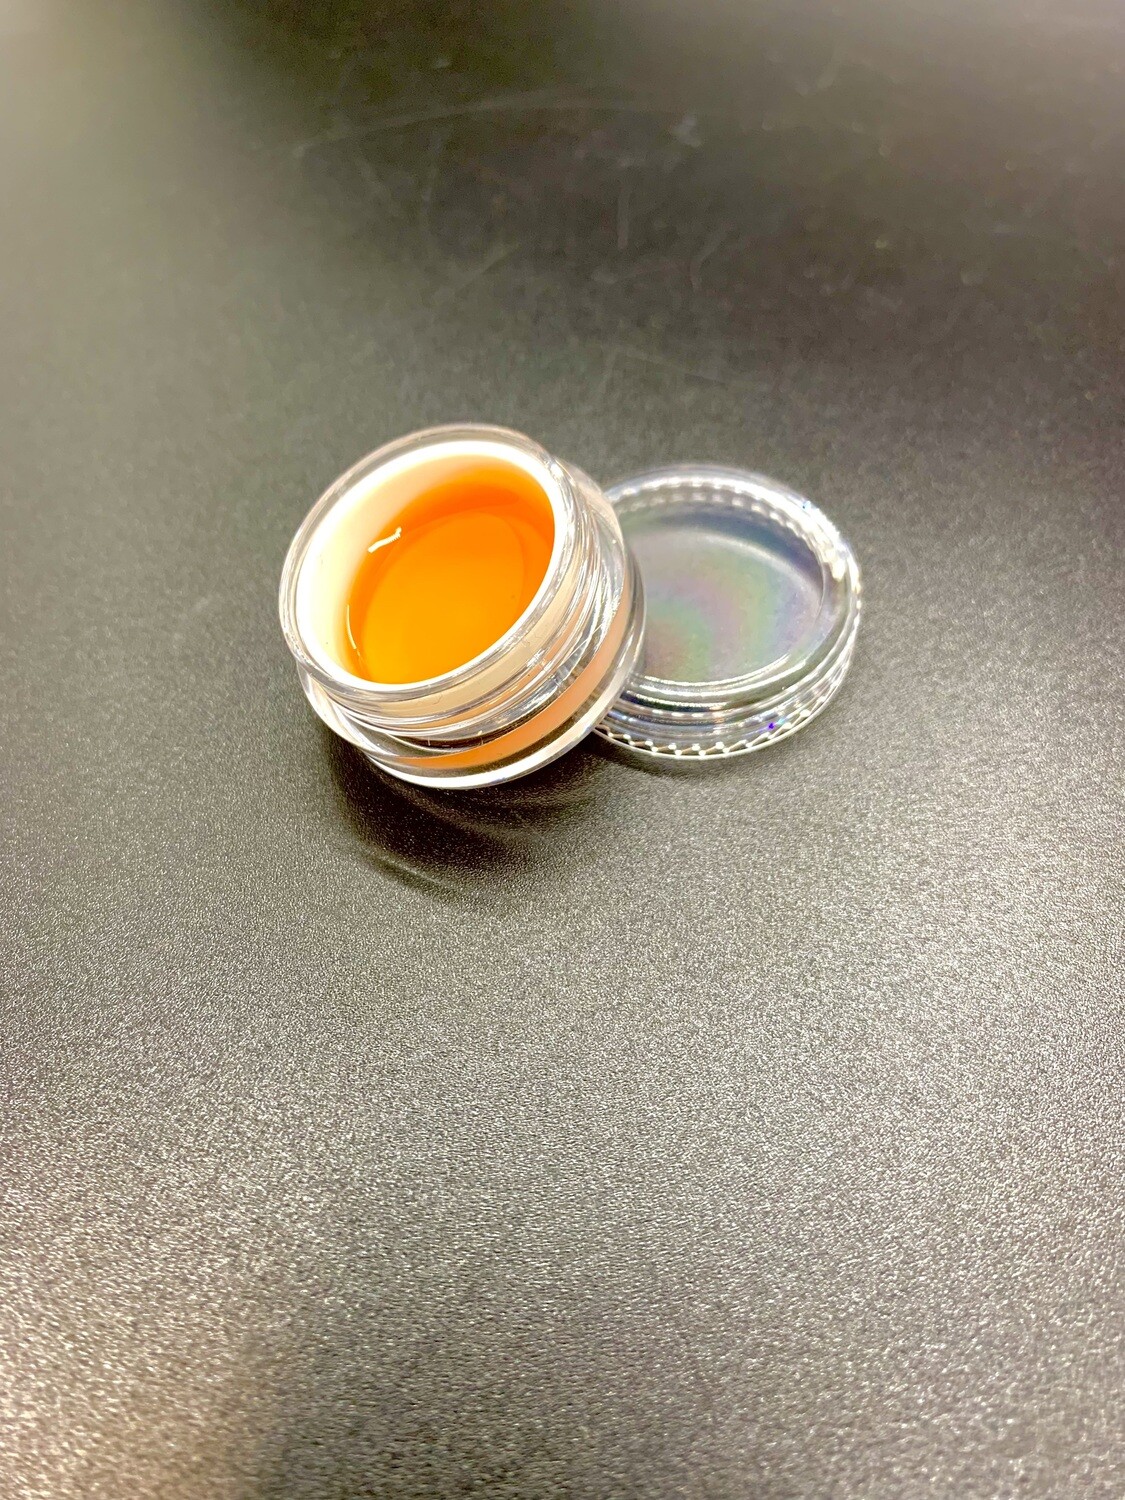 Watermelon Zkittles HHC Shatter Concentrate